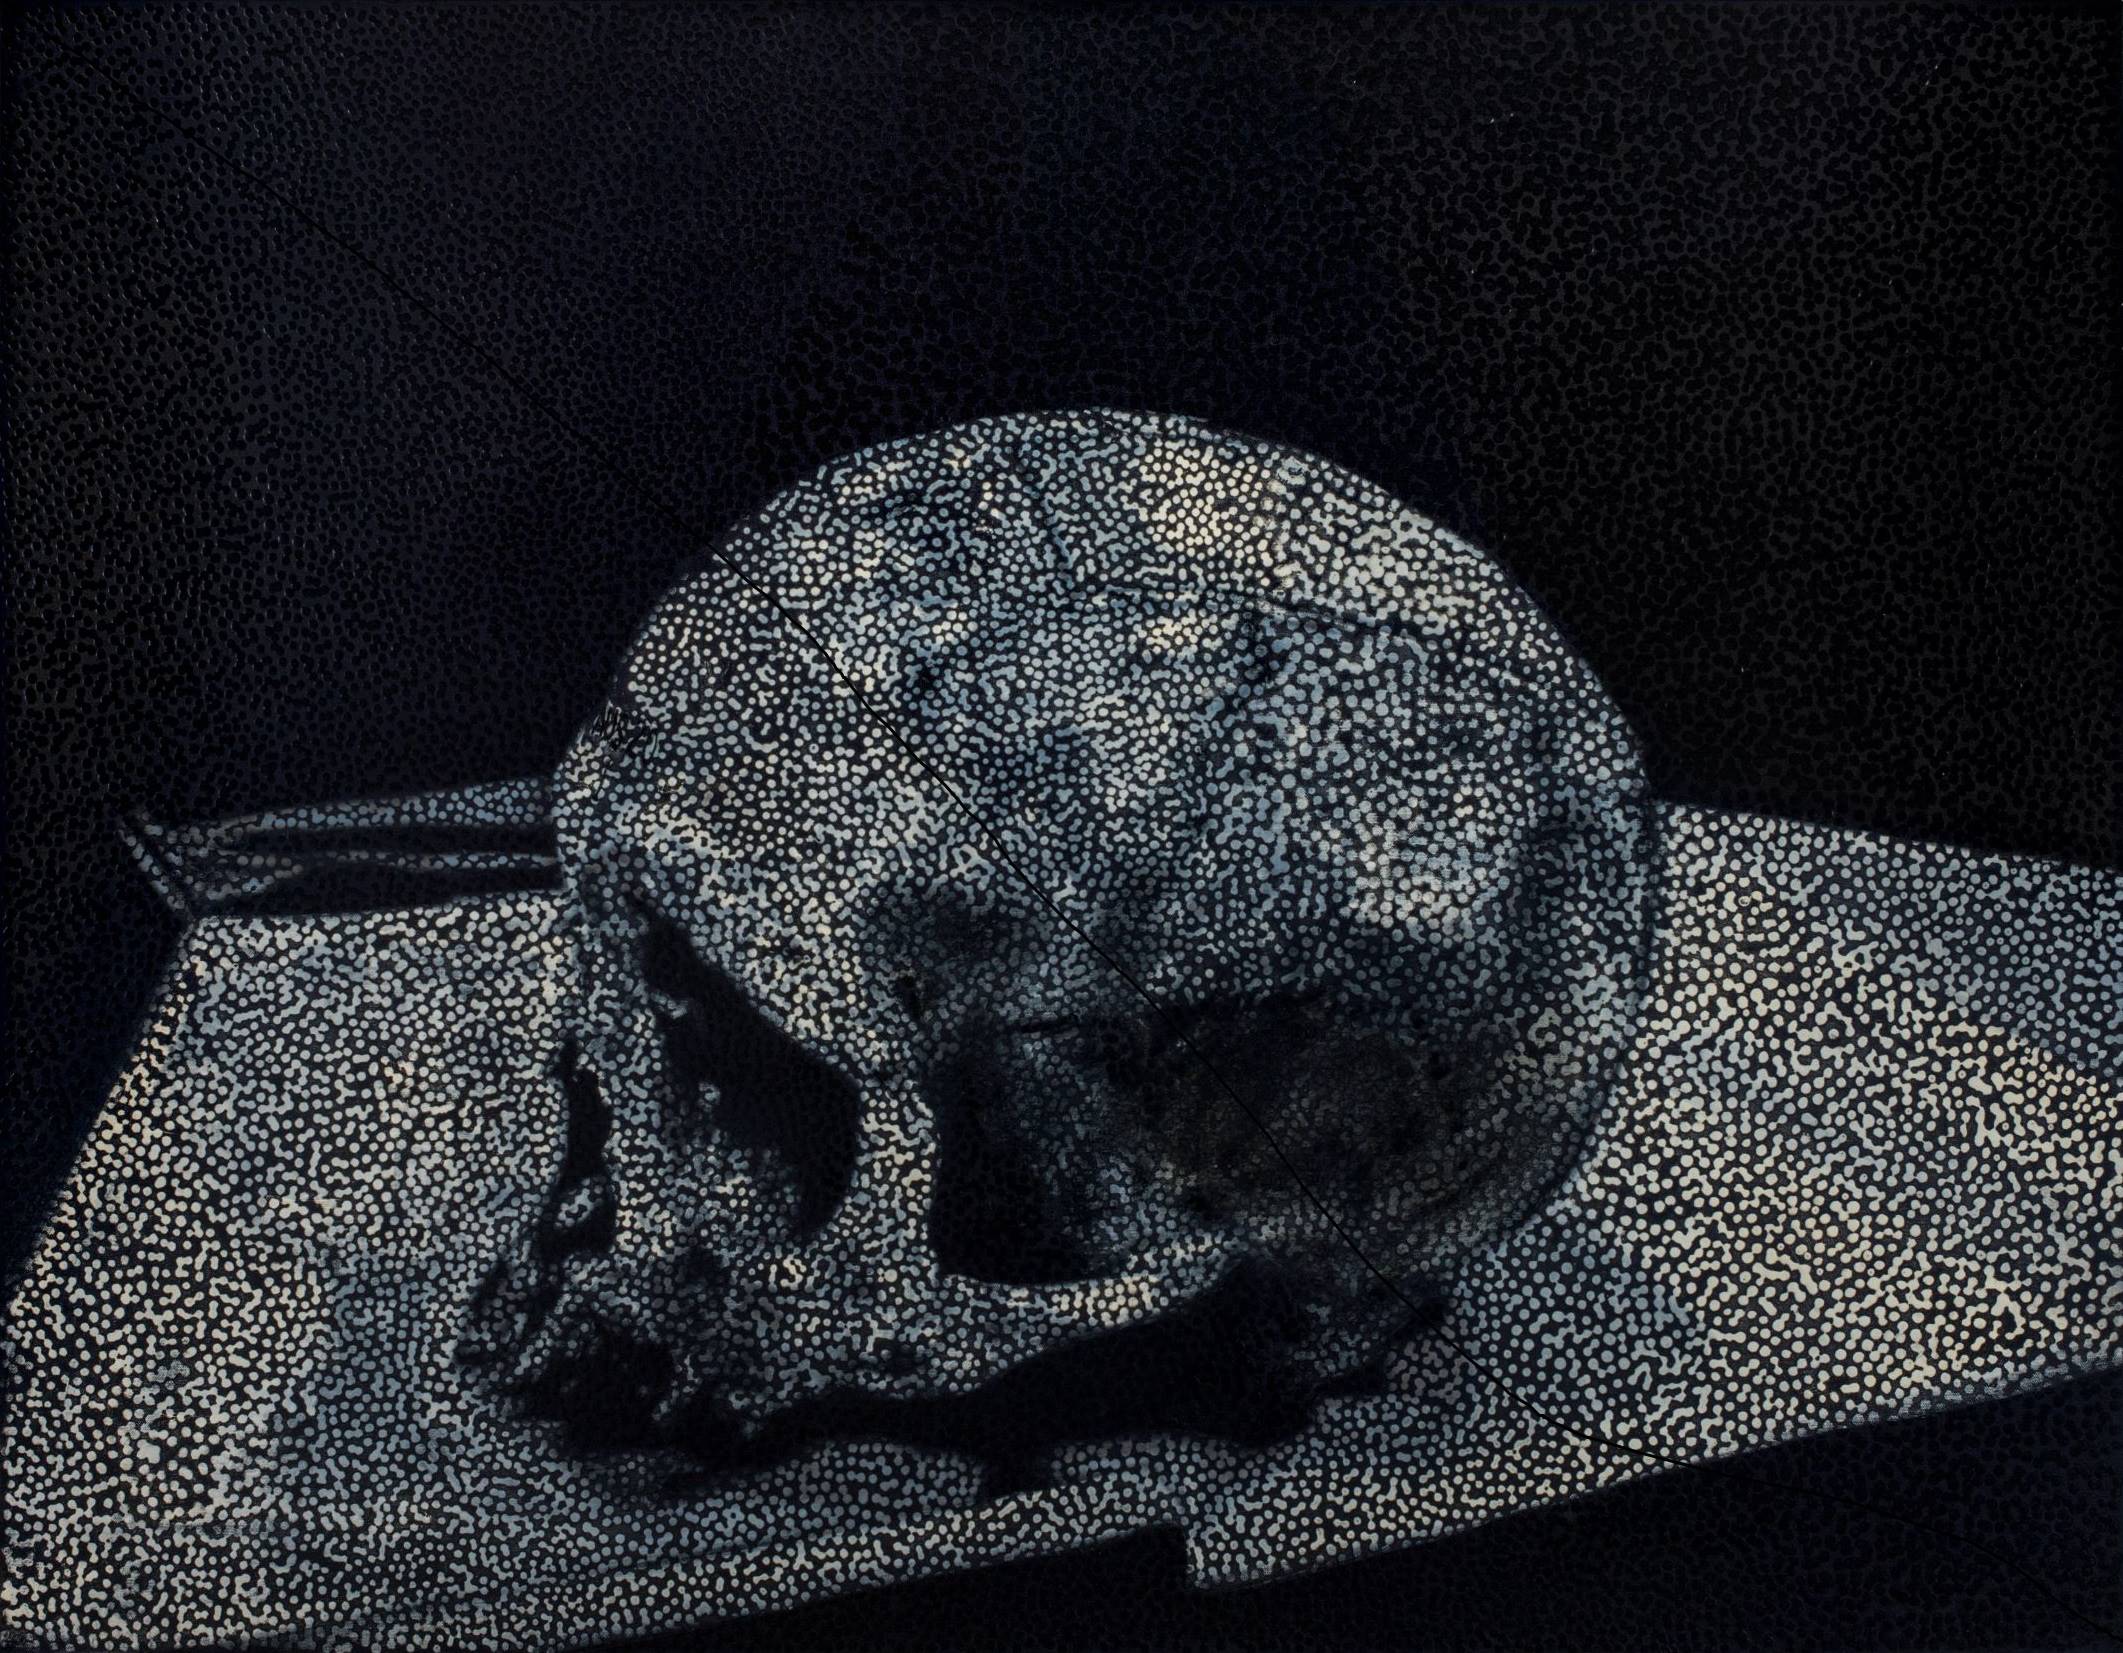 A painting of a skull made up of white and grey dots against a dark background